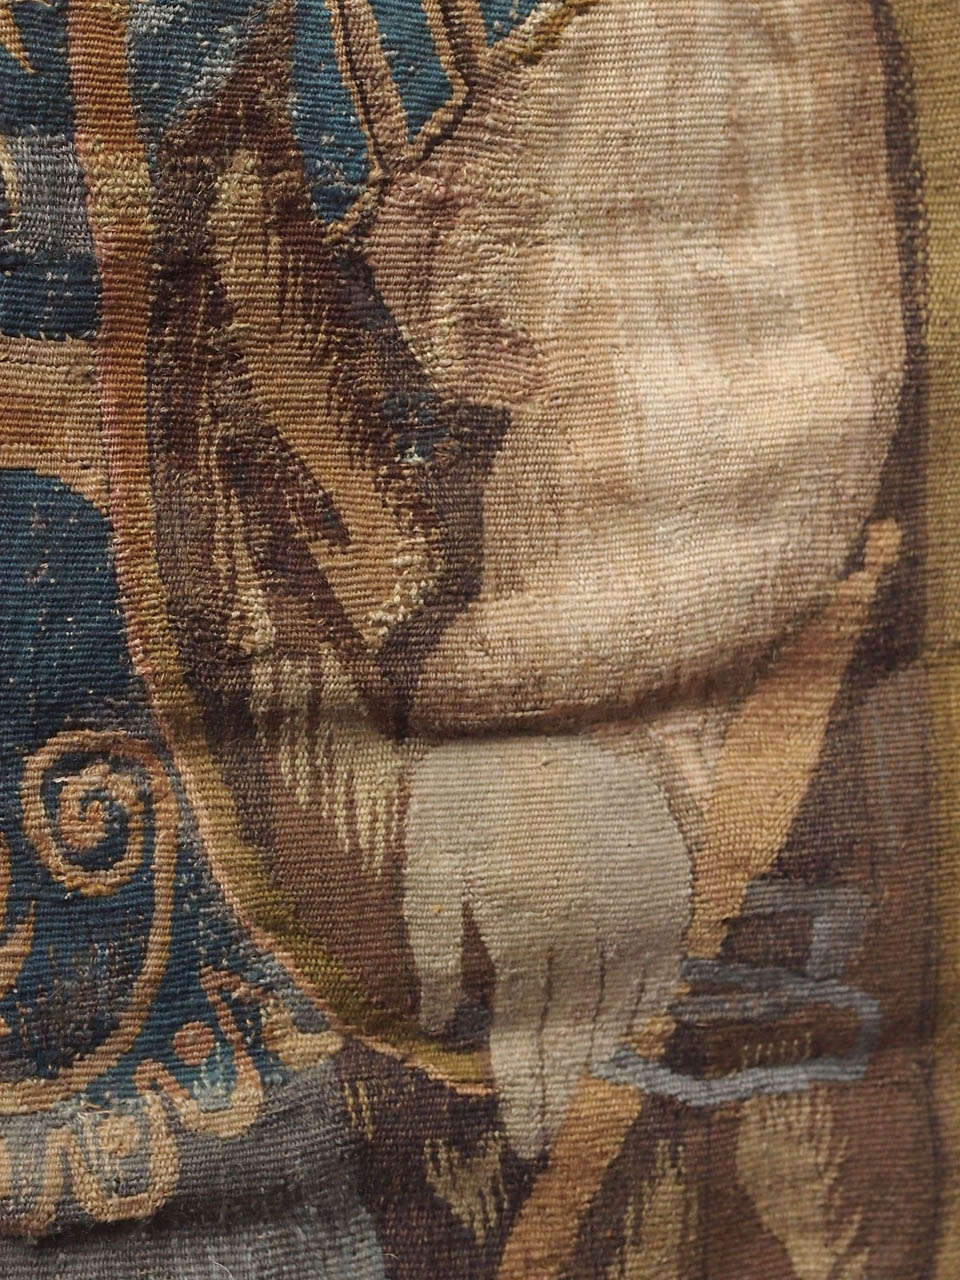 18th Century and Earlier 17th C. Flemish Tapestry Fragment in 19th Century Frame